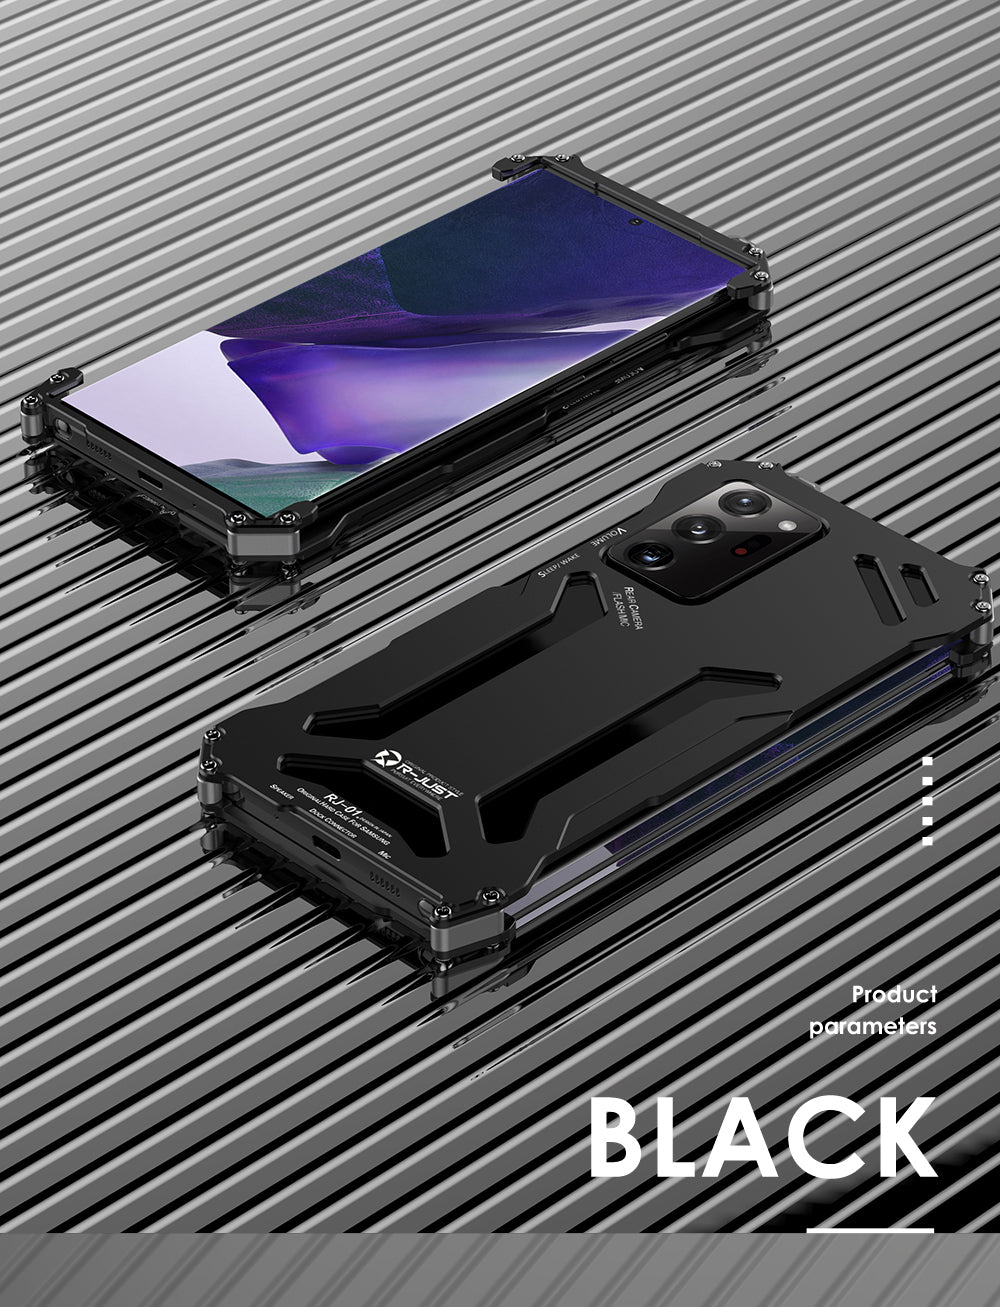 R-Just Gundam Aerospace Aluminum Contrast Color Shockproof Metal Shell Outdoor Protection Case for Samsung Galaxy Note20 Ultra & Galaxy Note20